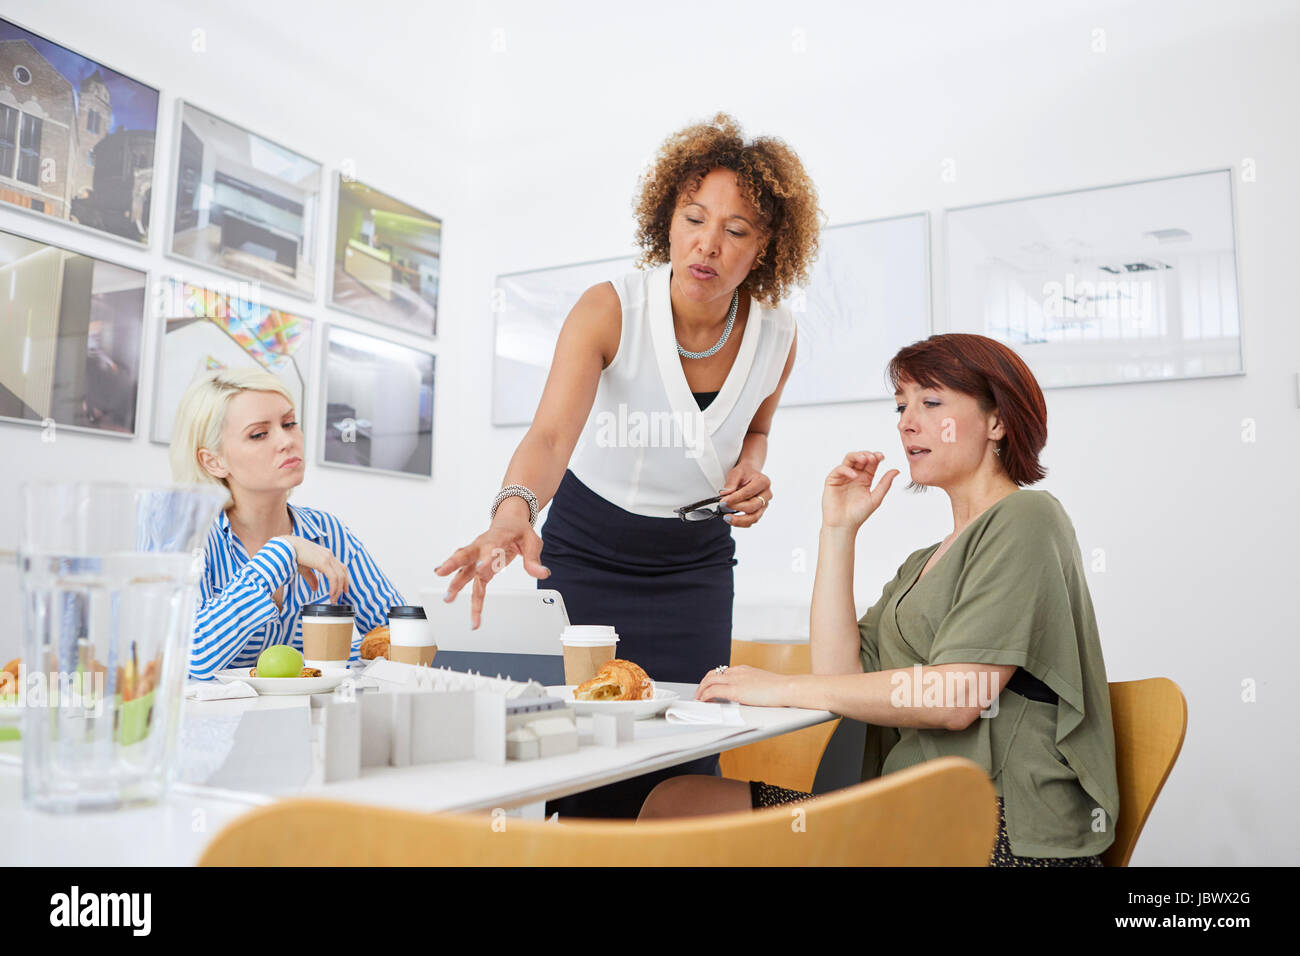 Female architect team pointing at architectural model on table in meeting Stock Photo